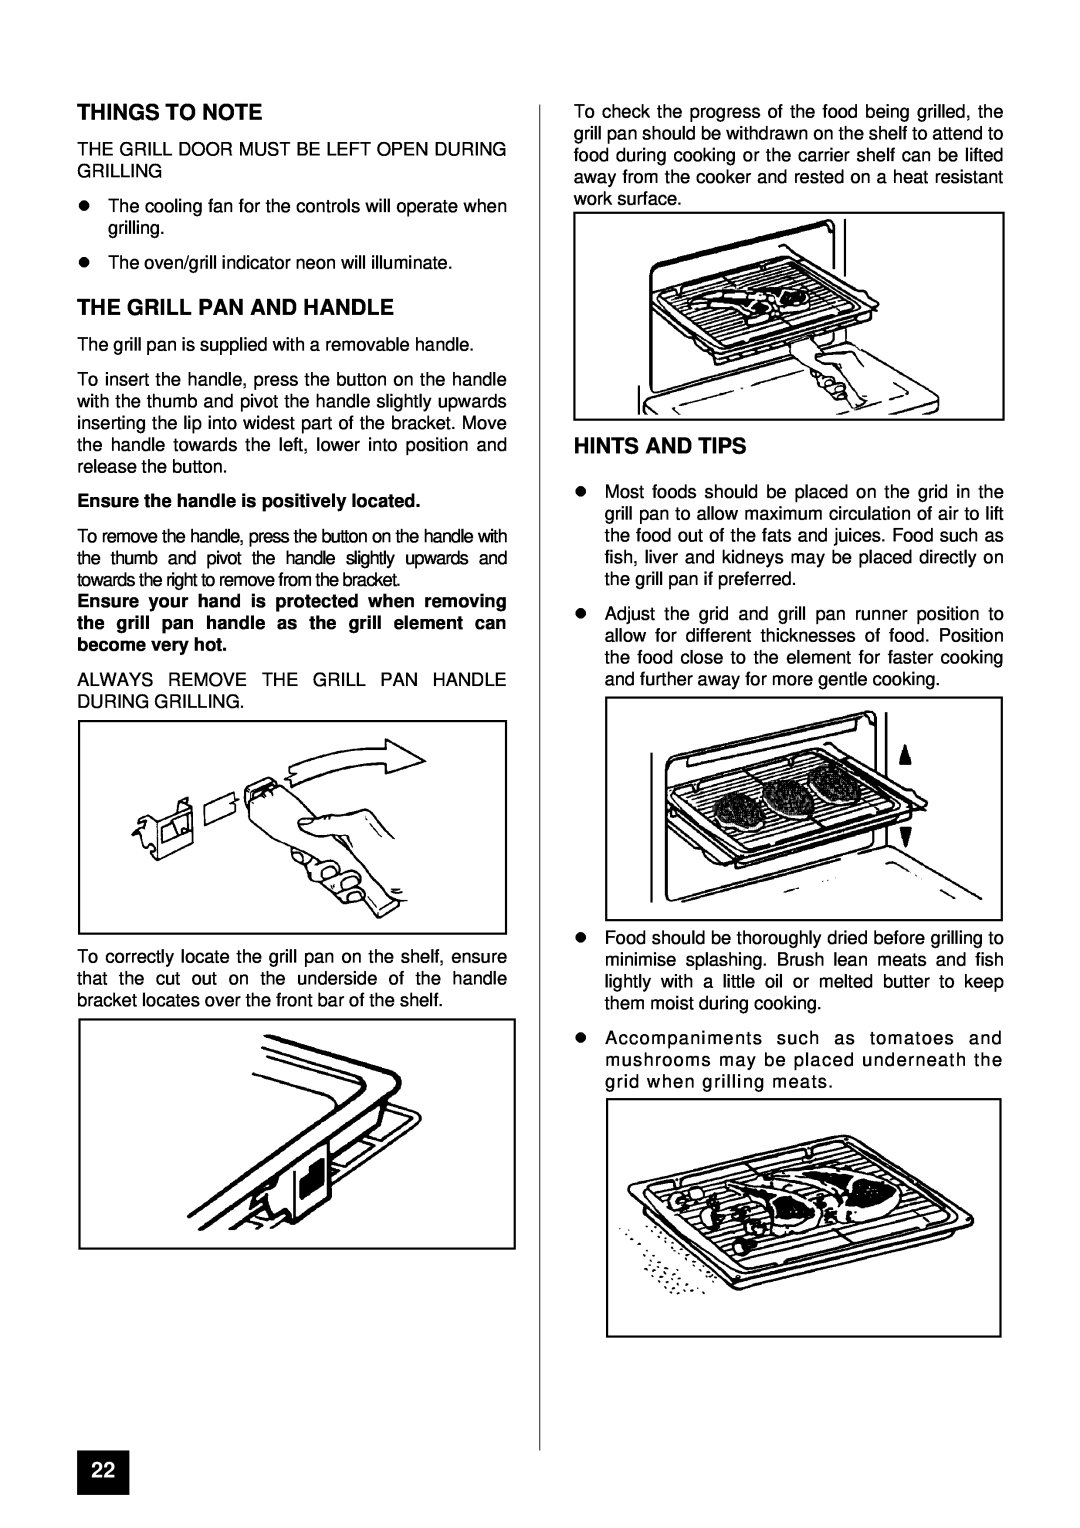 Tricity Bendix BS 613/2 Things To Note, The Grill Pan And Handle, Hints And Tips, Ensure the handle is positively located 